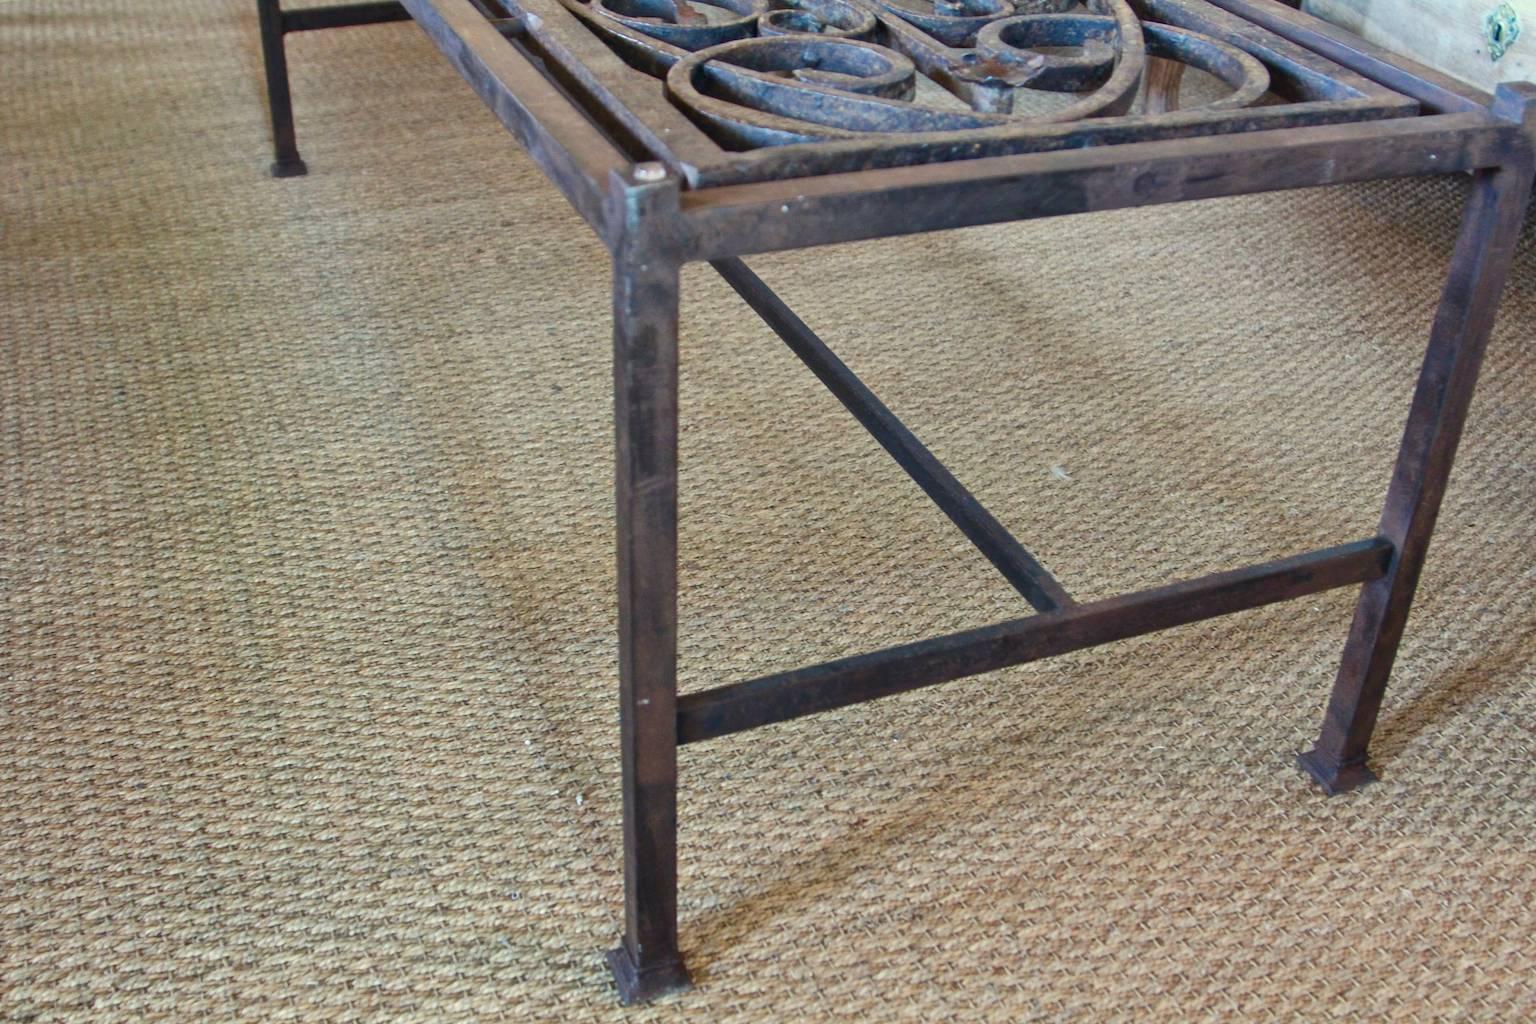 Country Glass Top Cocktail Table Made from 18th Century Portuguese Iron Gate